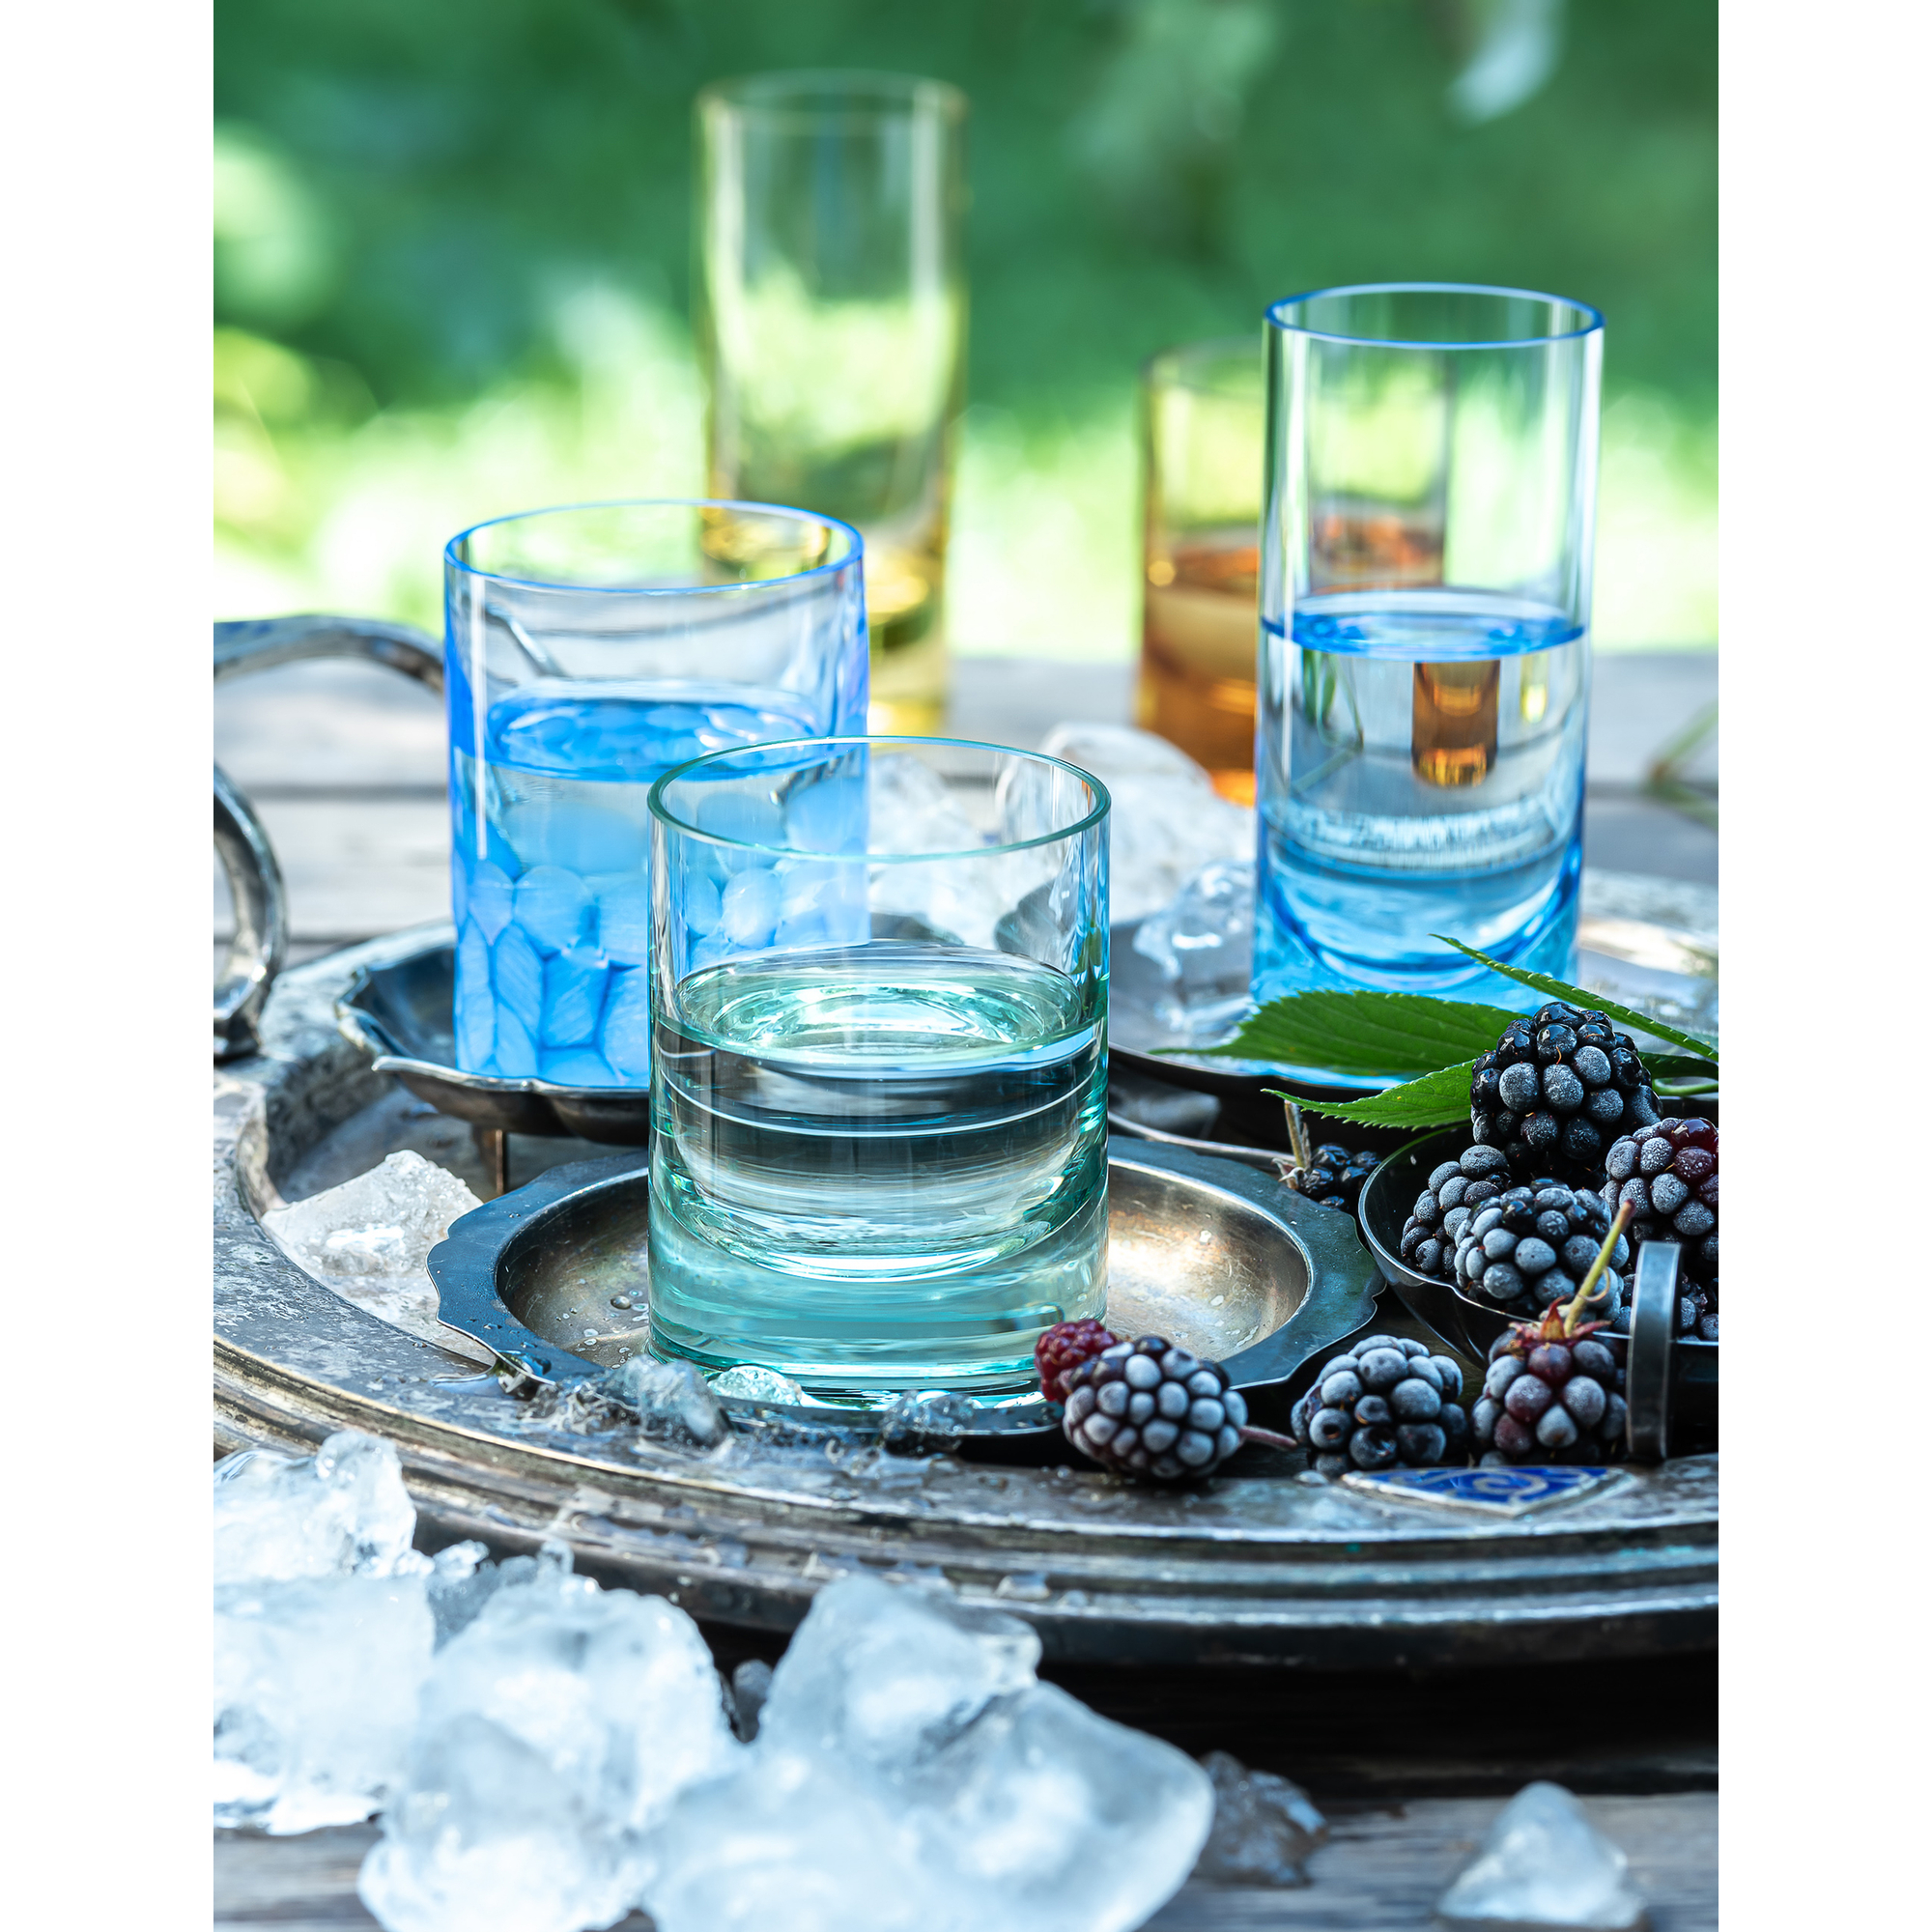 Bohemian crystal cocktail set Fluent and Whisky set from Moser